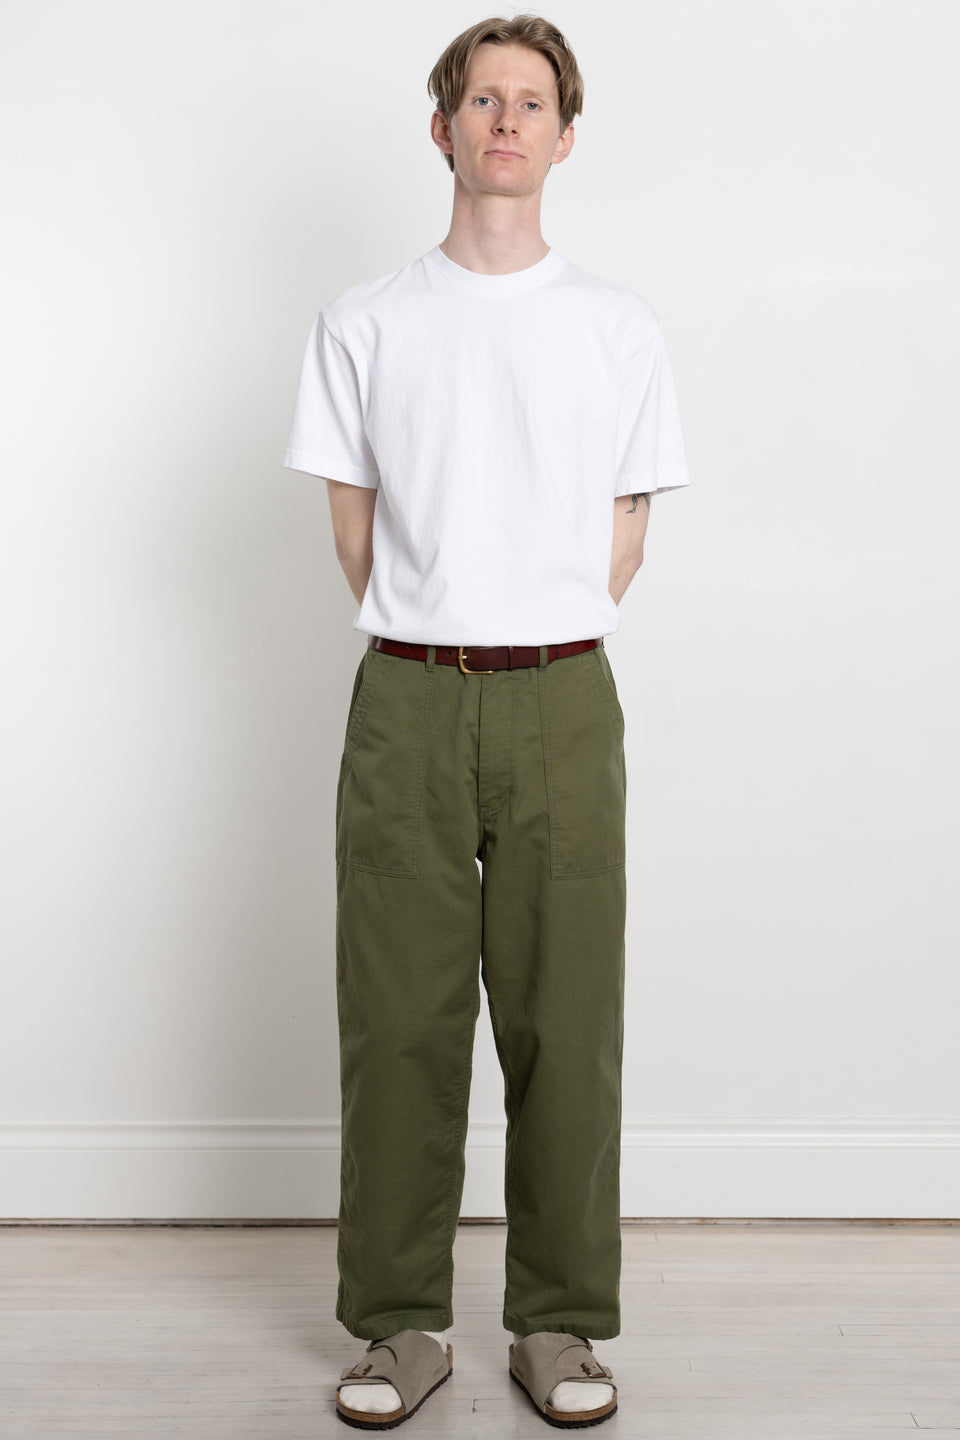 HATSKI Made in Japan 24SS Men's Collection Loose Tapered Utility Trouser Olive Calculus Victoria BC Canada